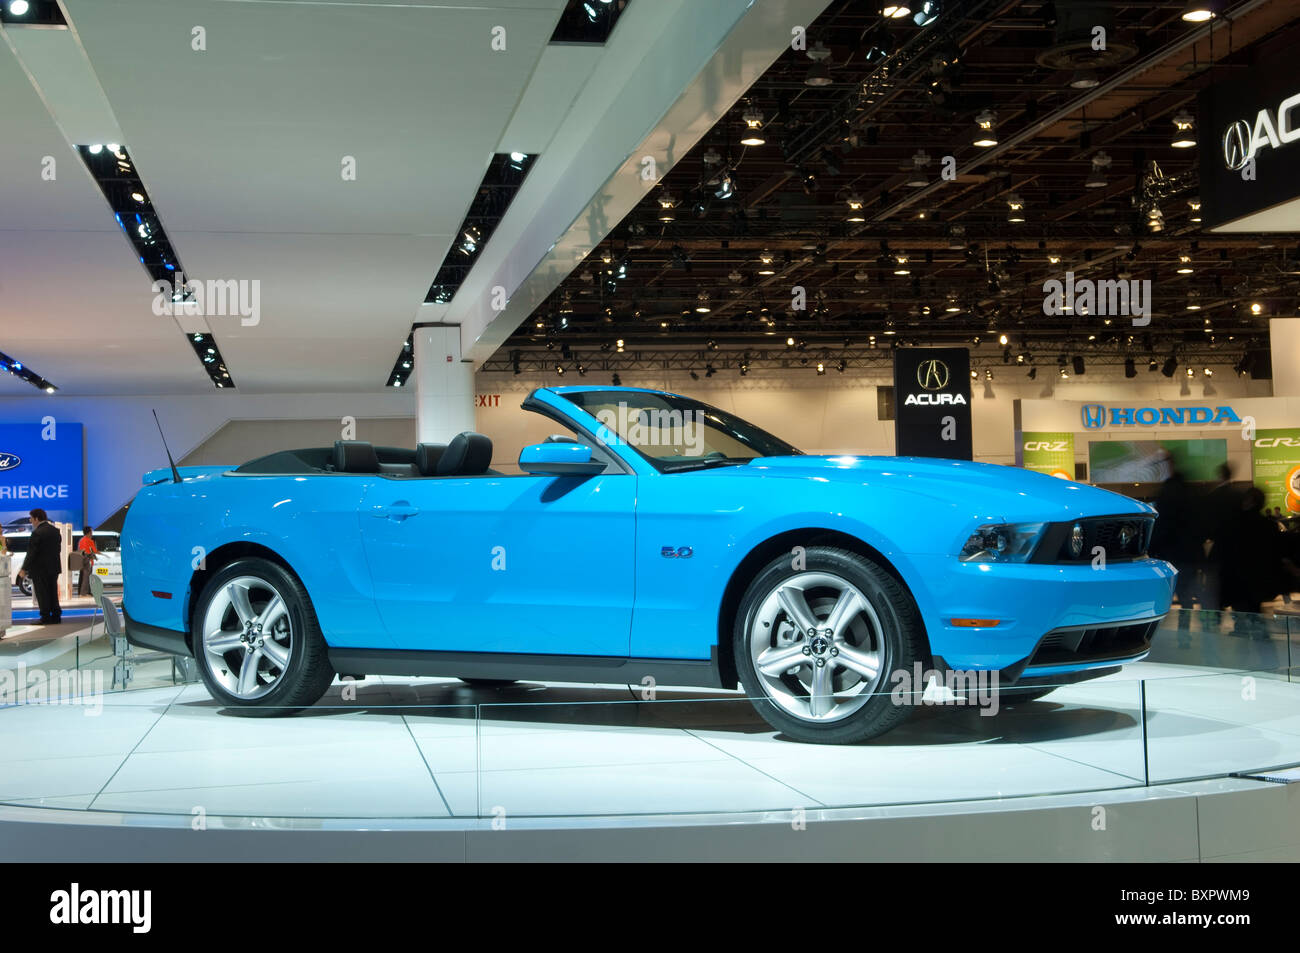 Ford Mustang GT 5.0 convertible at the 2010 North American International Auto Show in Detroit Stock Photo